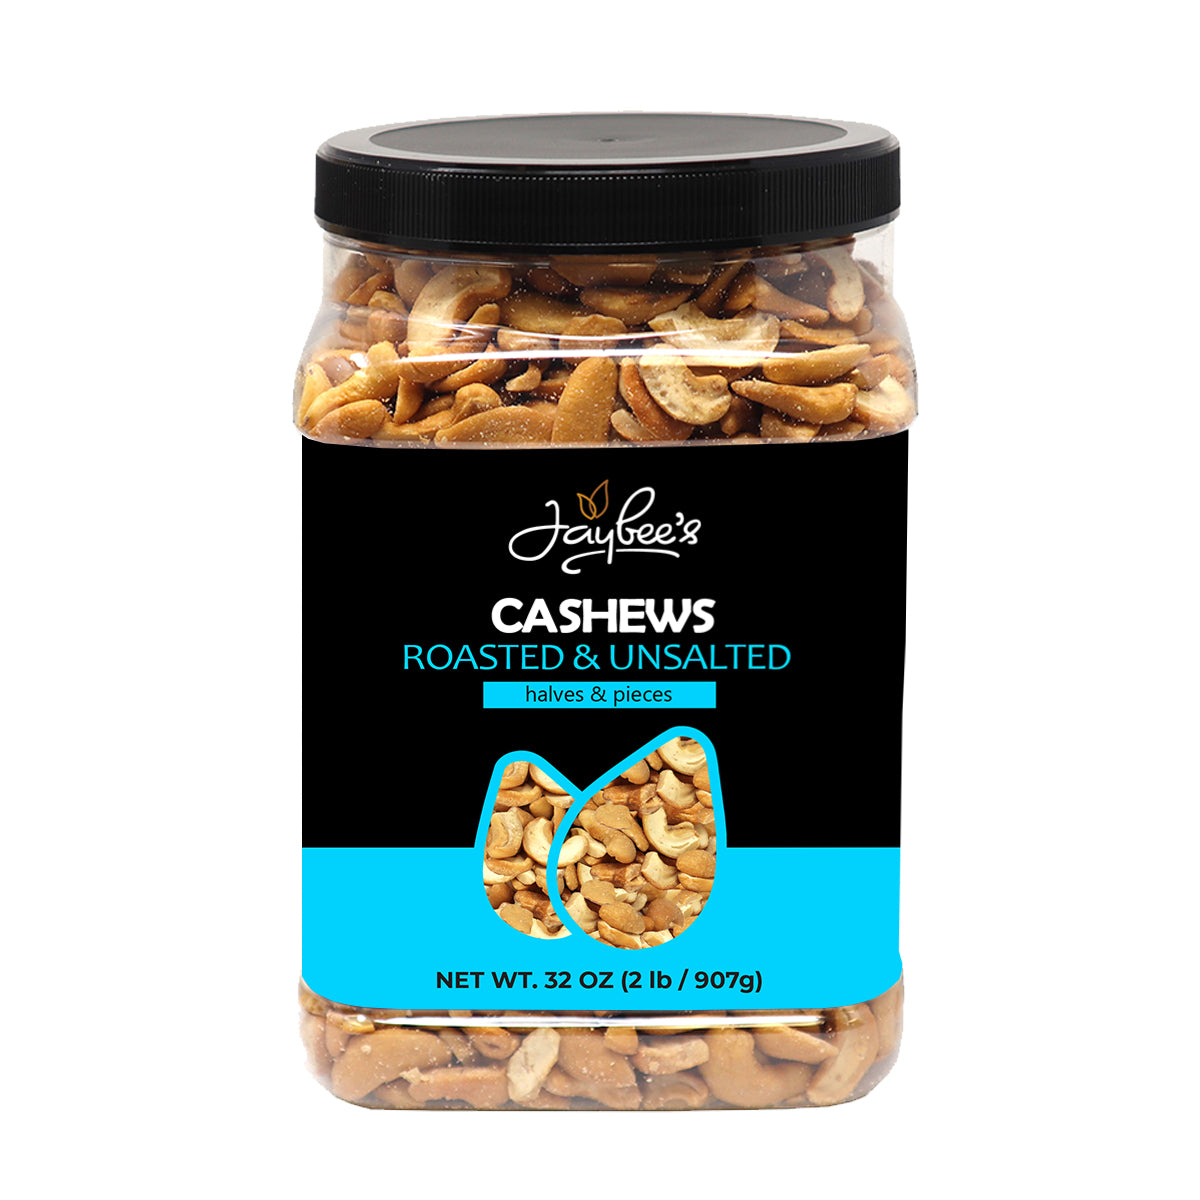 Cashews - Halves & Pieces, Roasted & Unsalted